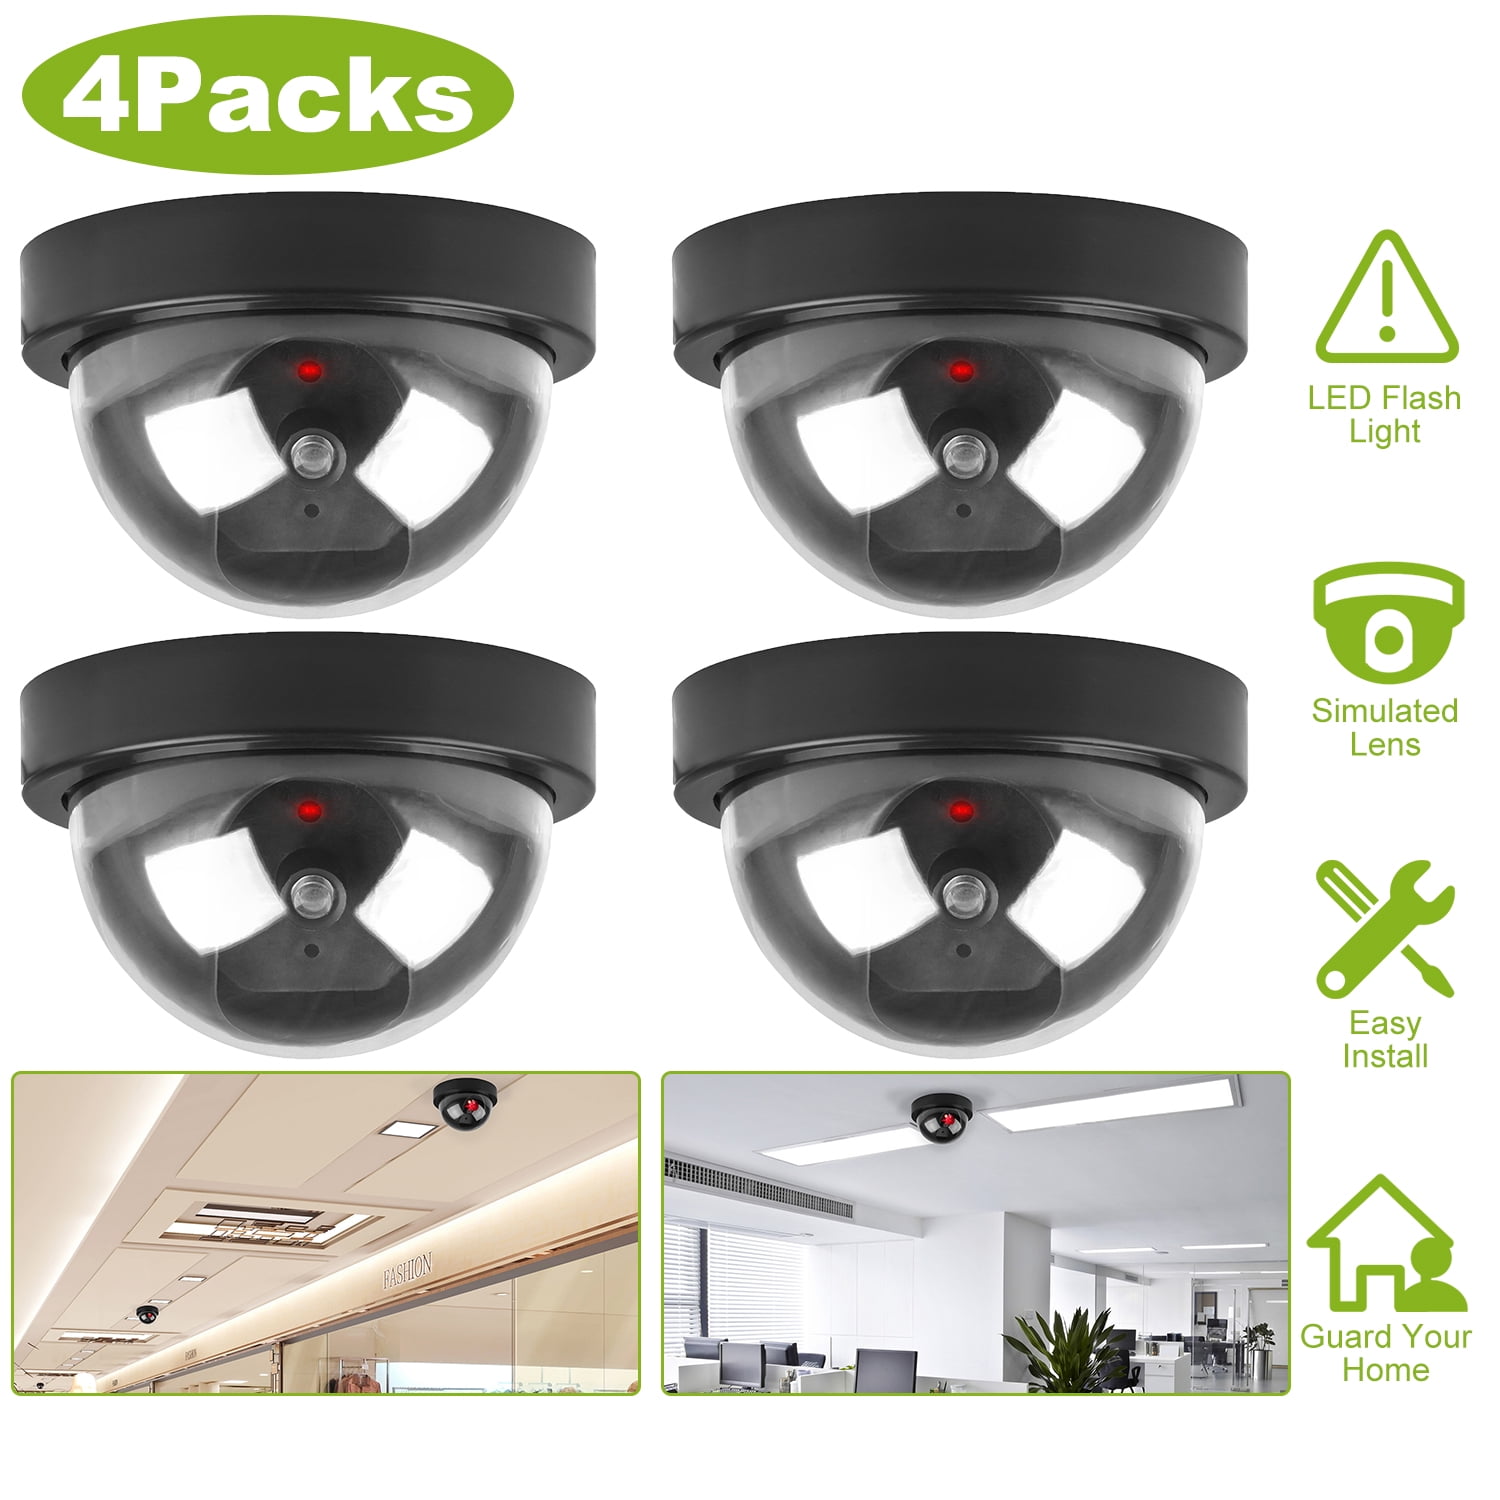 4 Dome Security Camera System - White 90 Ft Night Vision - 4k